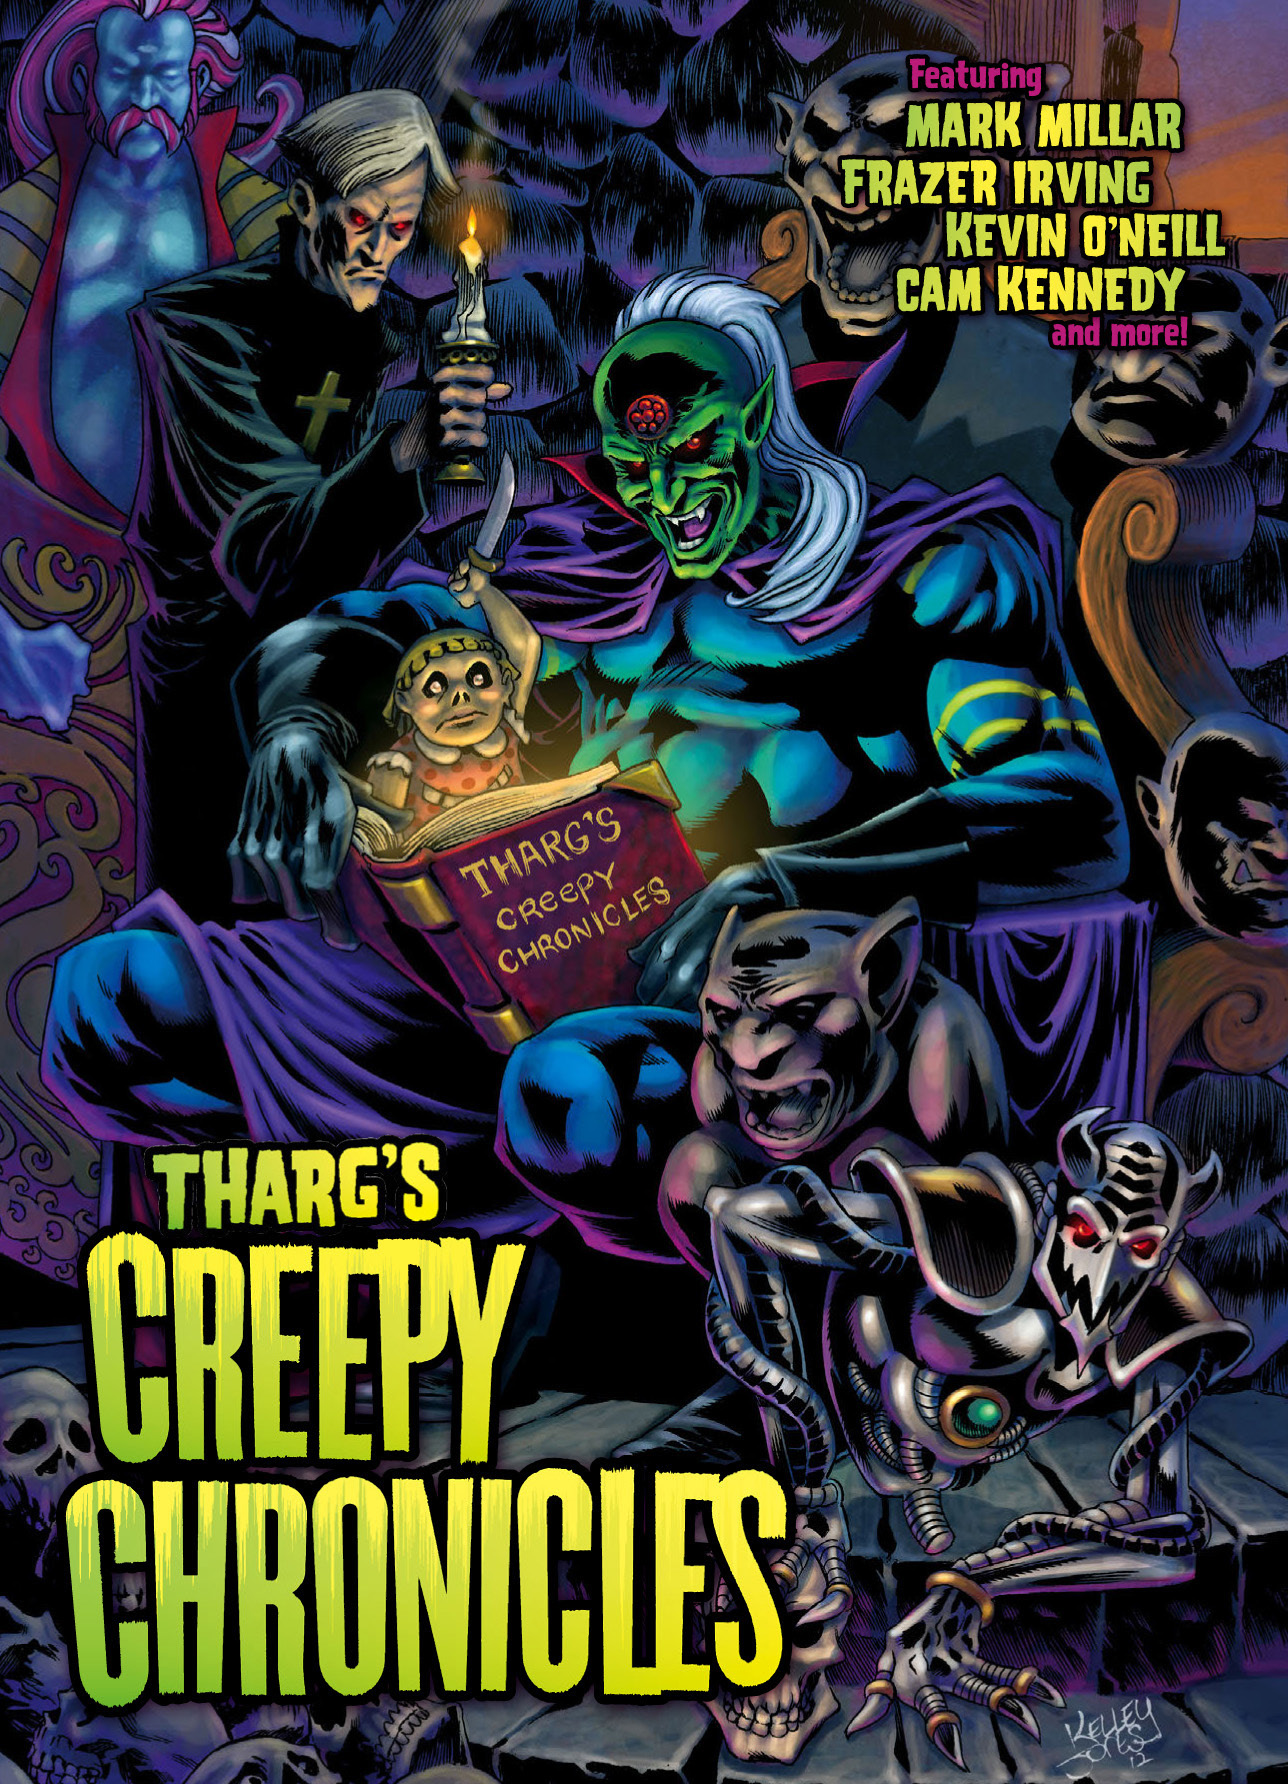 Read online Tharg's Creepy Chronicles comic -  Issue # TPB - 1